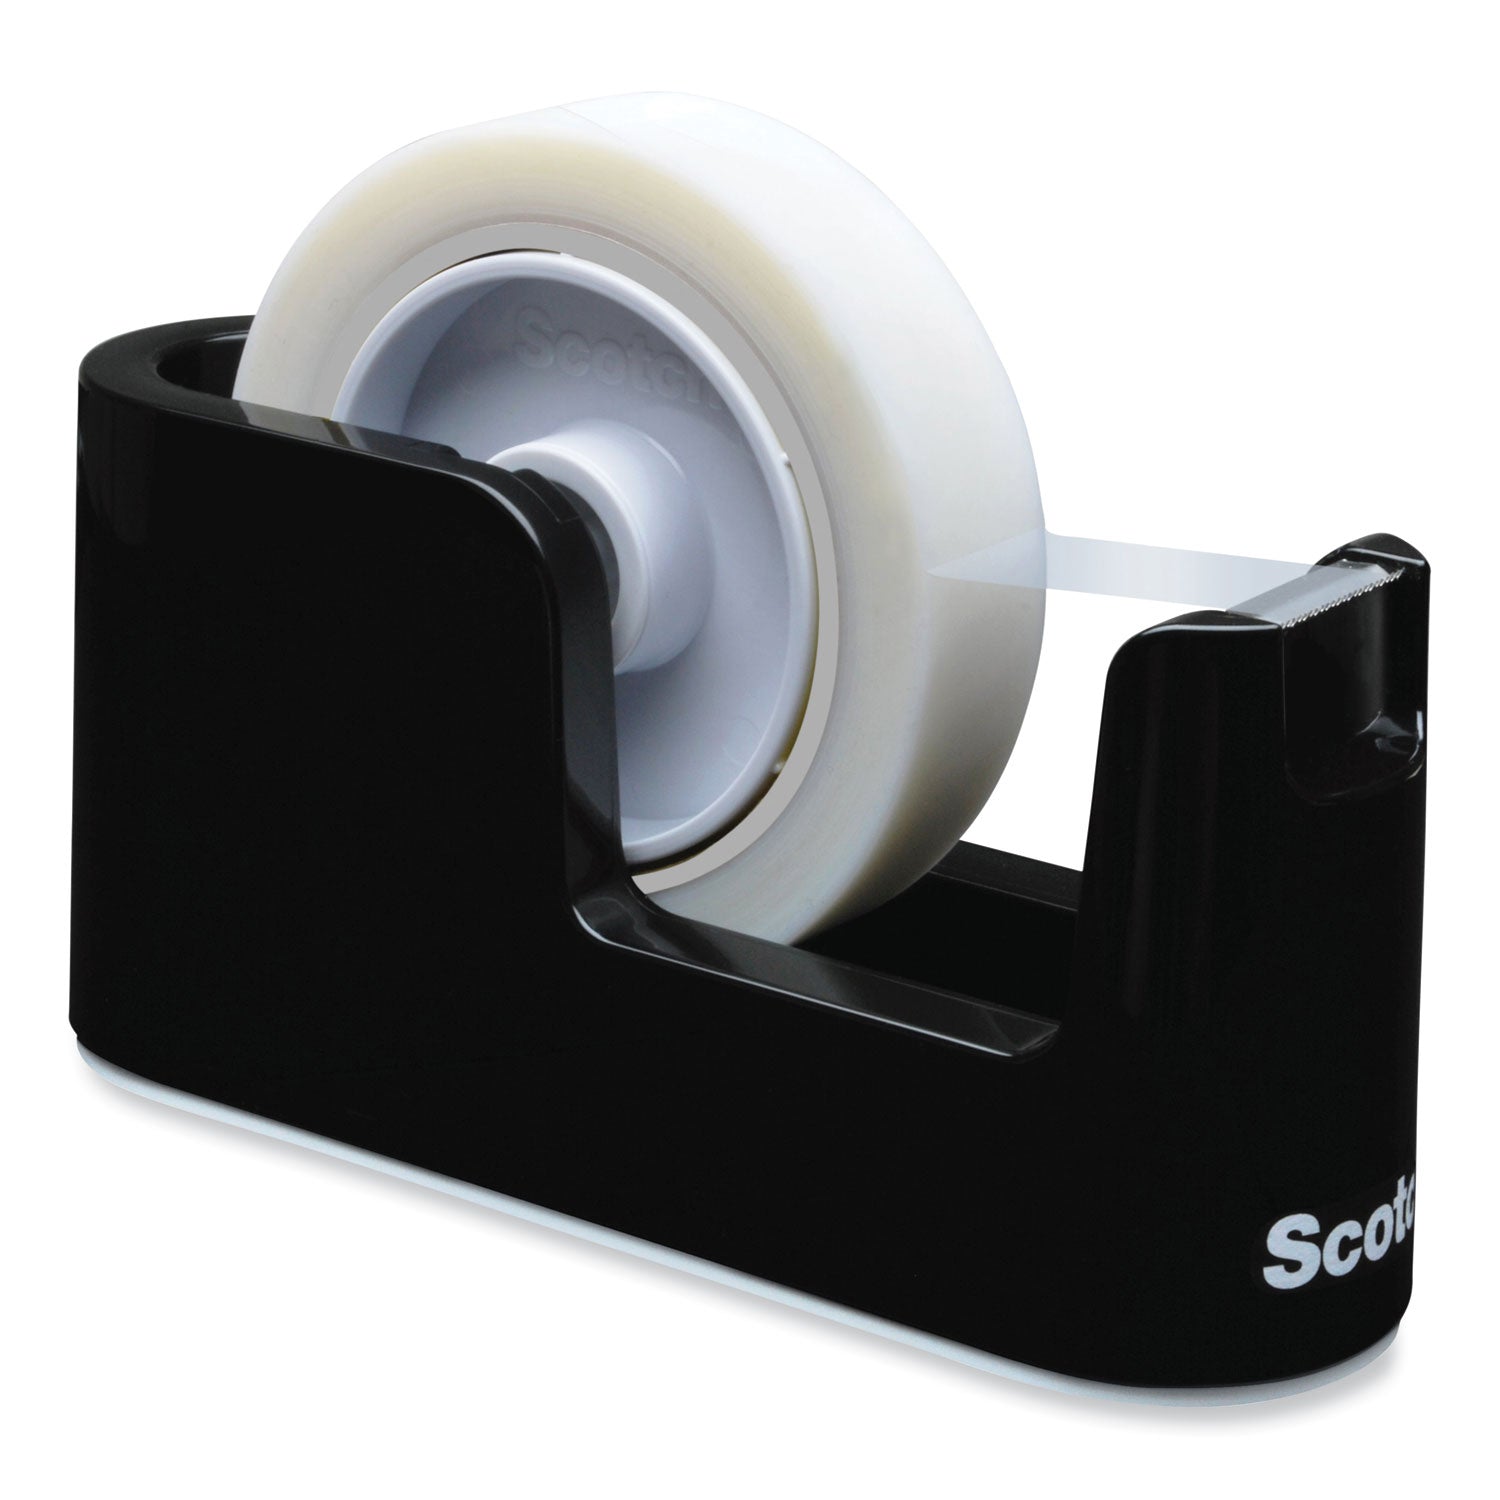 Heavy Duty Weighted Desktop Tape Dispenser with One Roll of Tape, 3" Core, ABS, Black - 